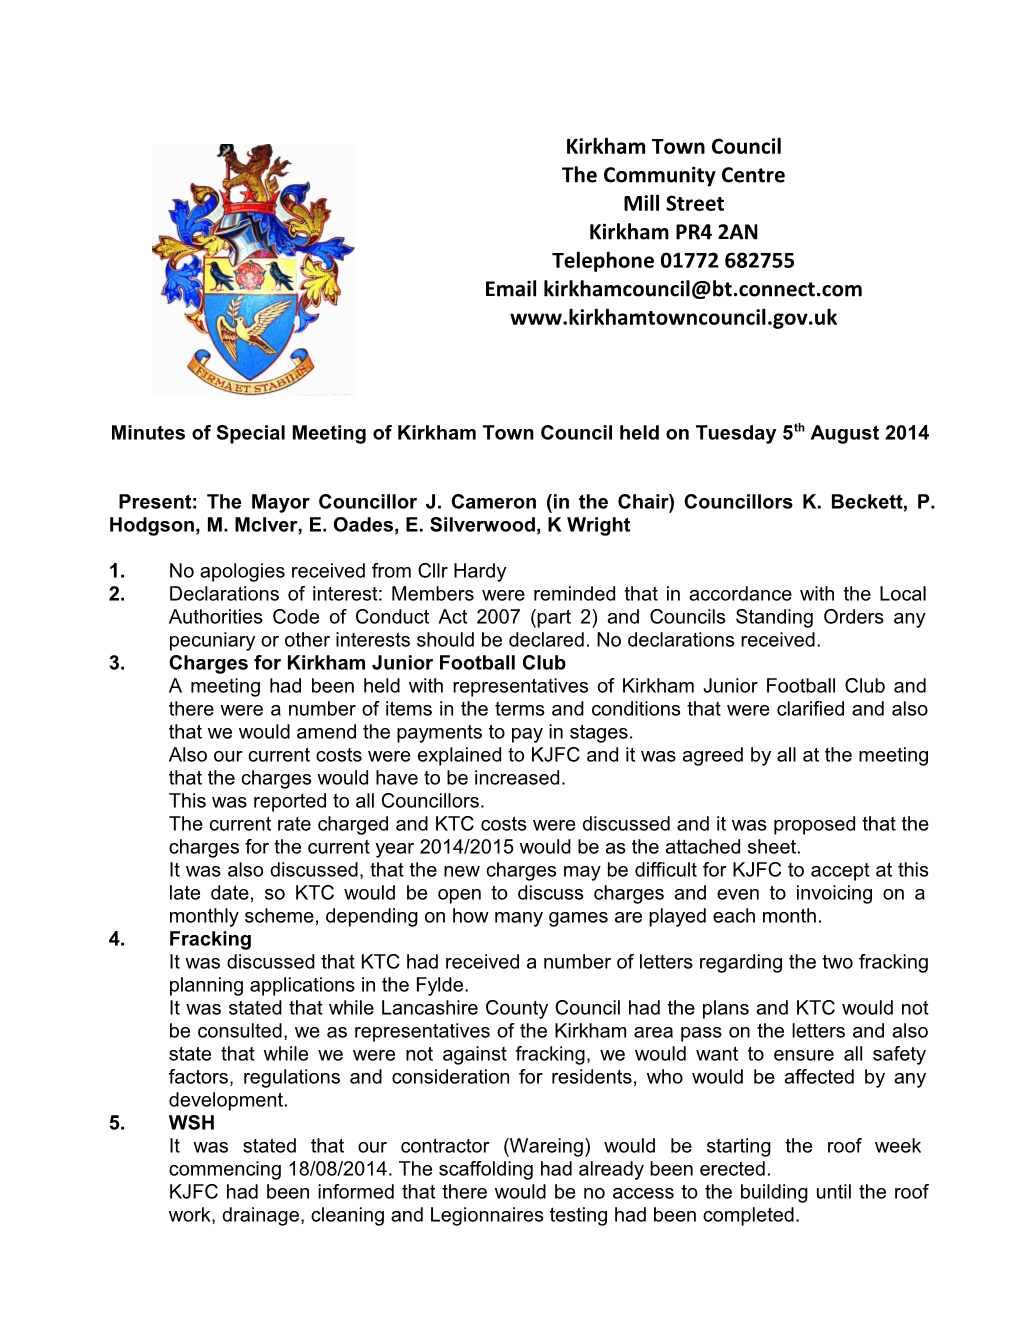 Minutesof Special Meeting of Kirkham Town Council Held on Tuesday 5Th August 2014